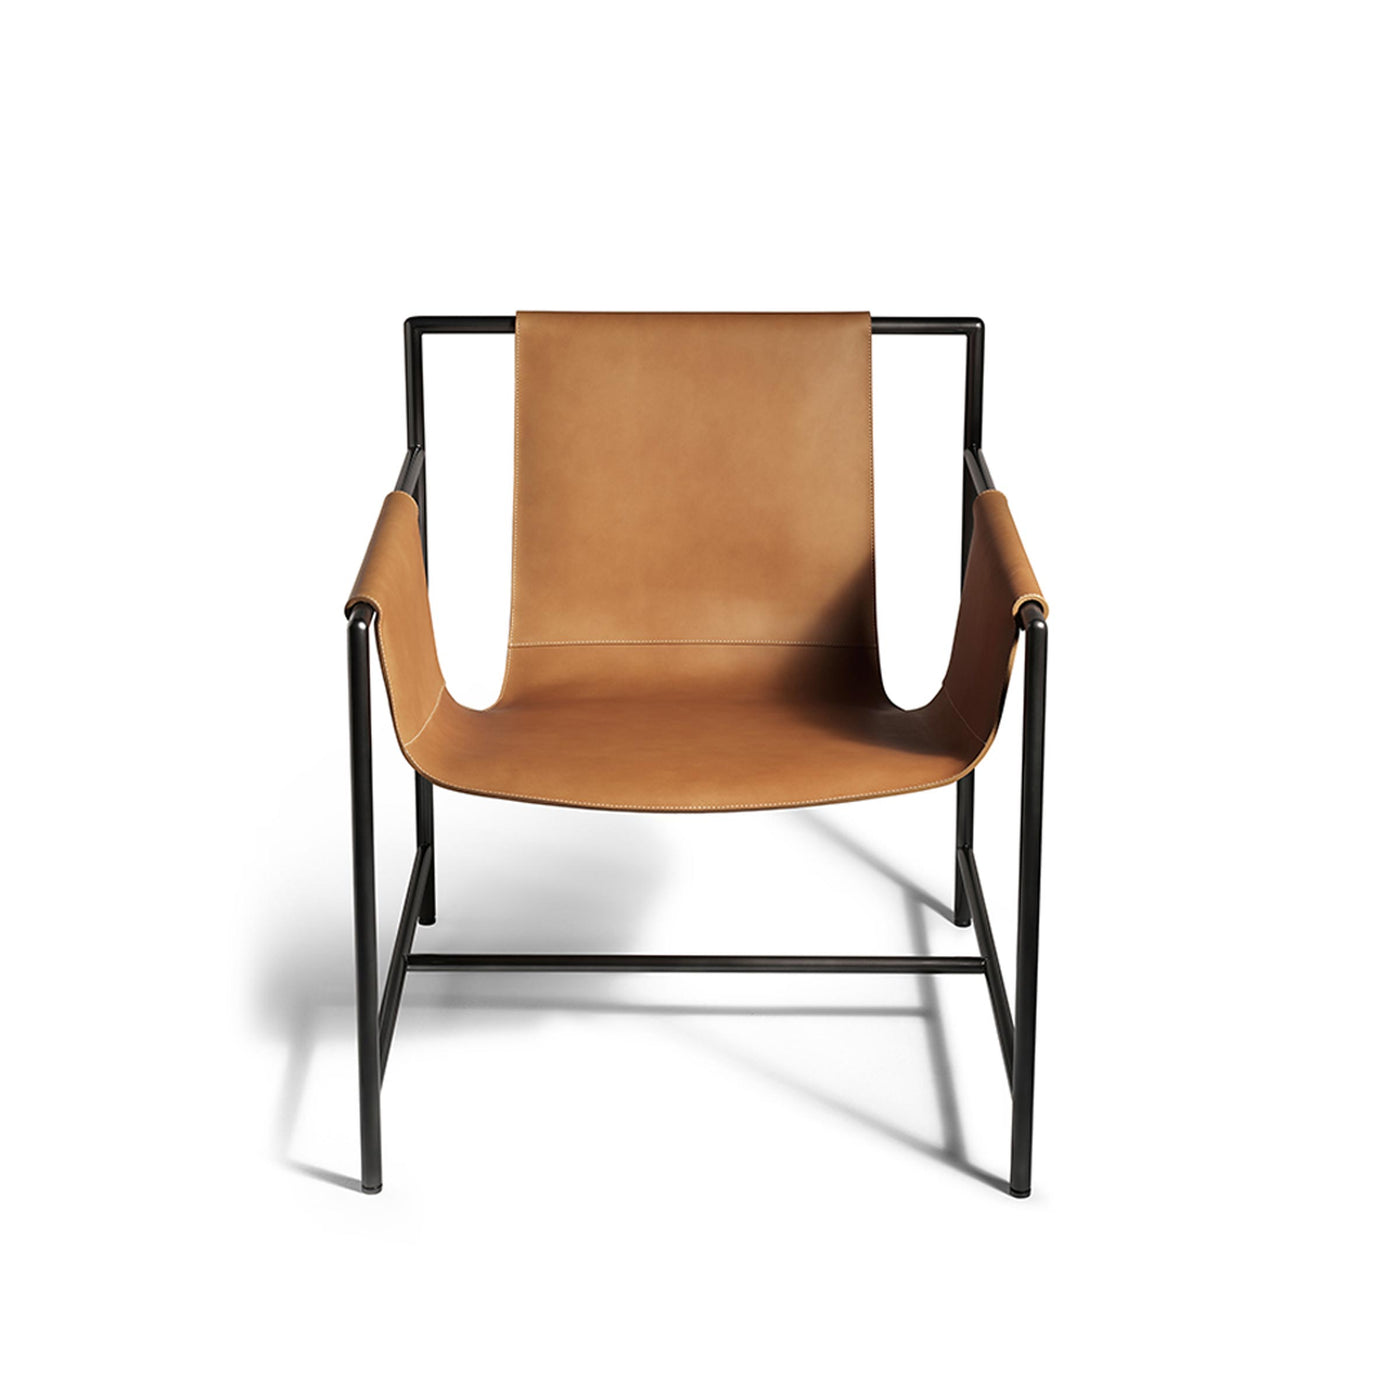 Leather Armchair MING'S HEART by Shi-Chieh Lu for Poltrona Frau 01